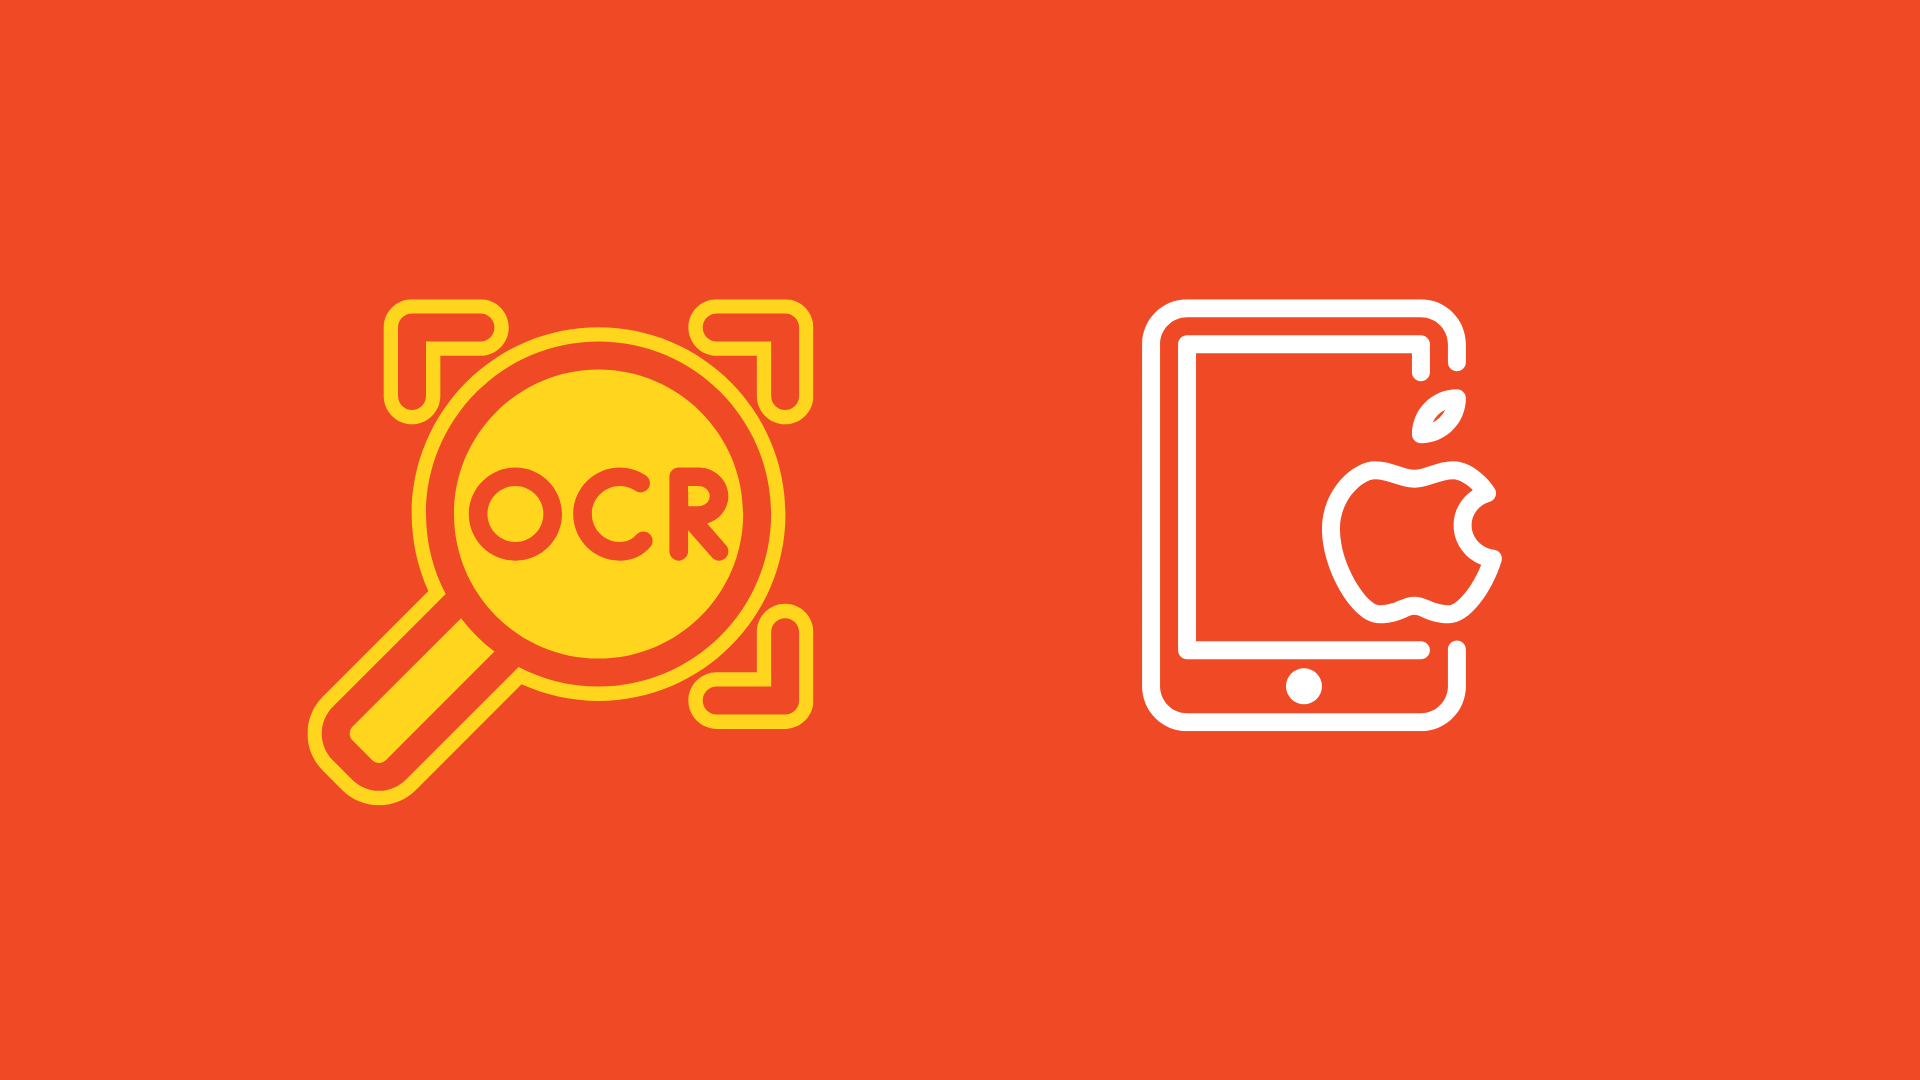 An illustration featuring two icons: On the left, a yellow OCR (Optical Character Recognition) symbol with a magnifying glass and corner brackets, representing OCR data capture technology; on the right, an outlined icon of a tablet with a stylized apple logo, indicating iOS devices. The background is a solid red, highlighting the topic of iOS SDK advancements in OCR data capture and image processing for mobile applications.